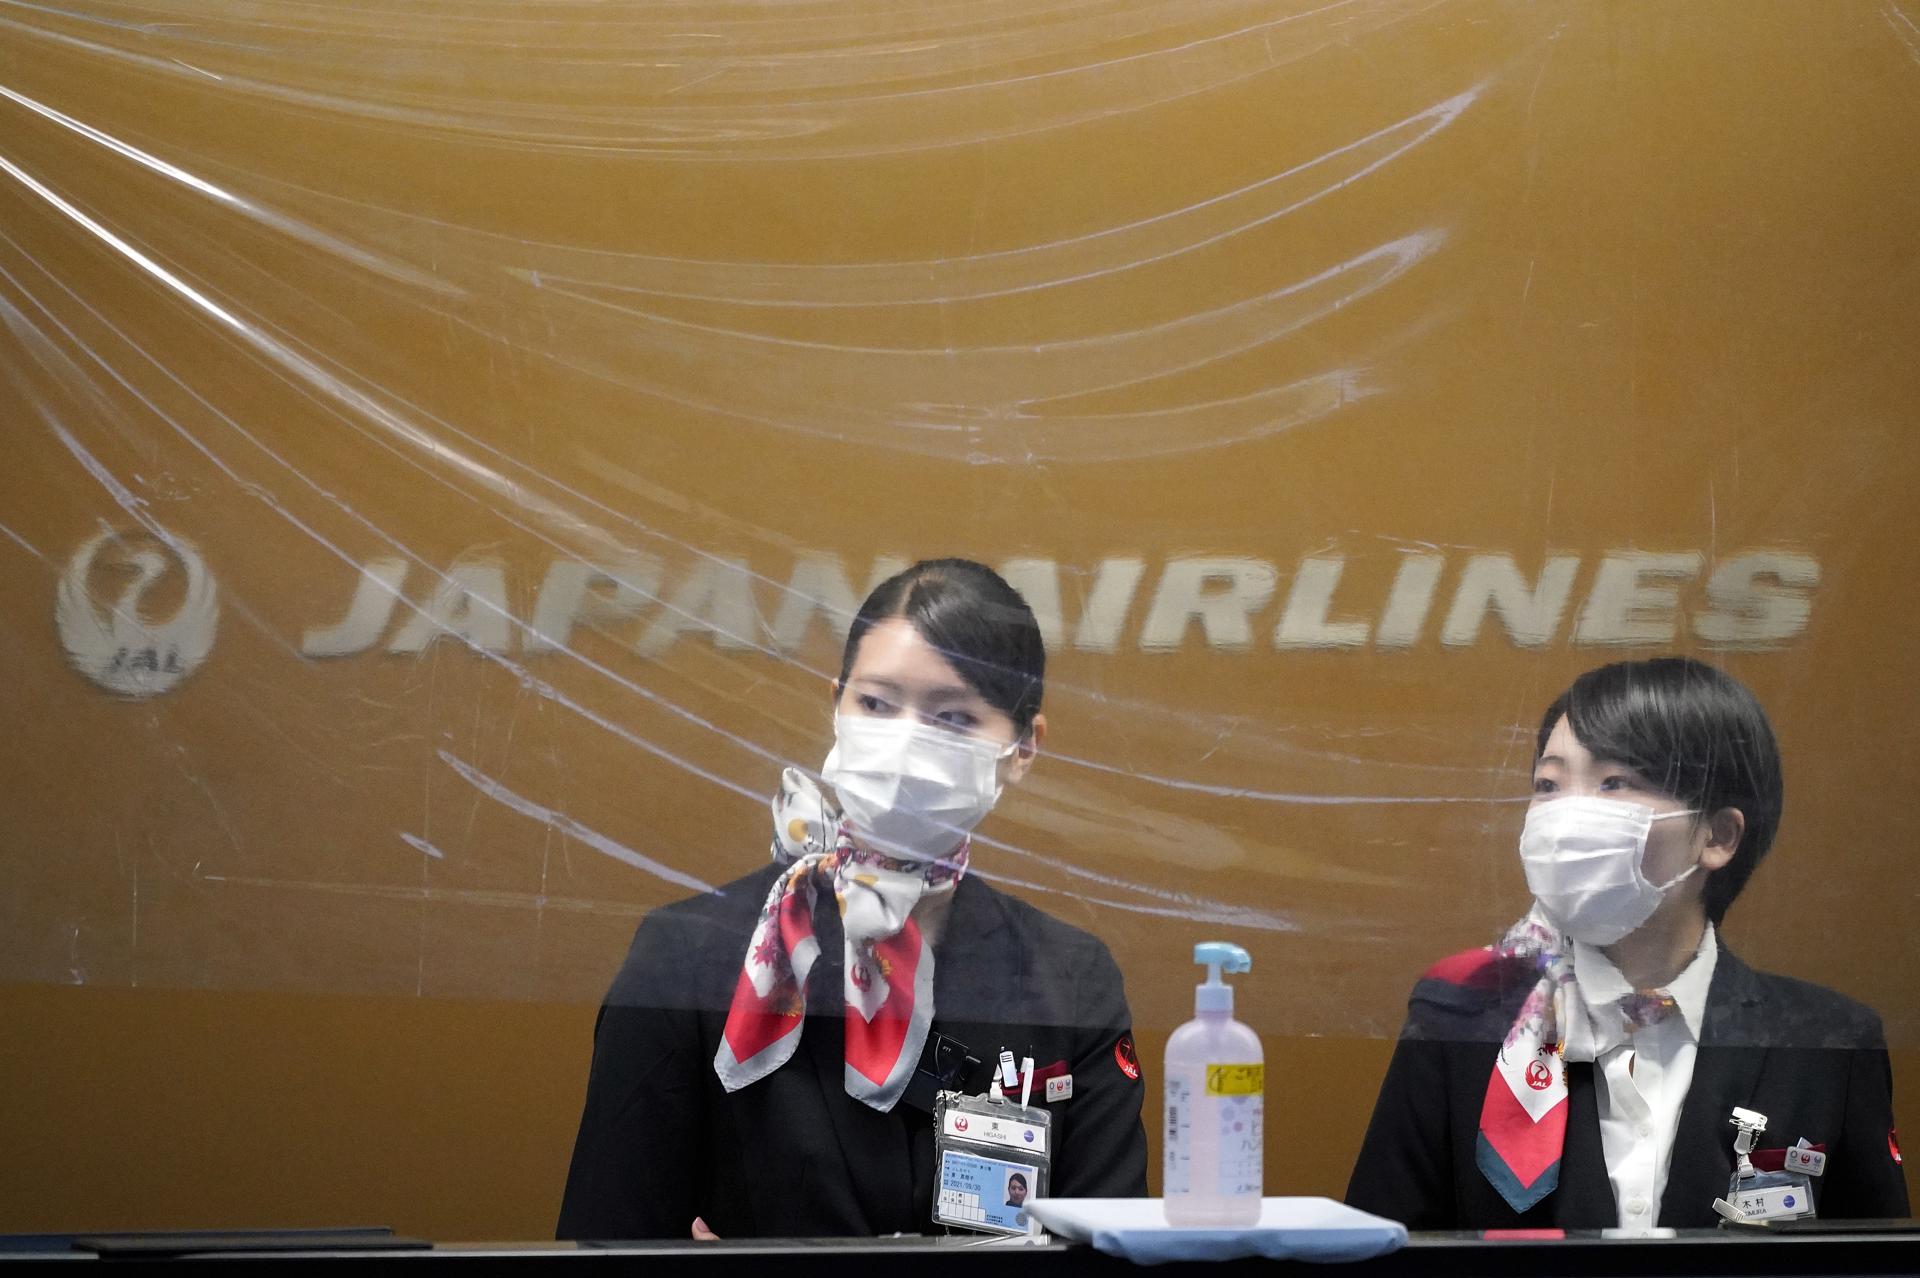 Japan Airlines (JAL) ground staff members wear protective gear and stand behind a plastic sheet for protection against COVID-19 disease infection at Haneda Airport in Tokyo, Japan, 28 April 2020 (issued 30 April 2020). EFE-EPA FILE/FRANCK ROBICHON
